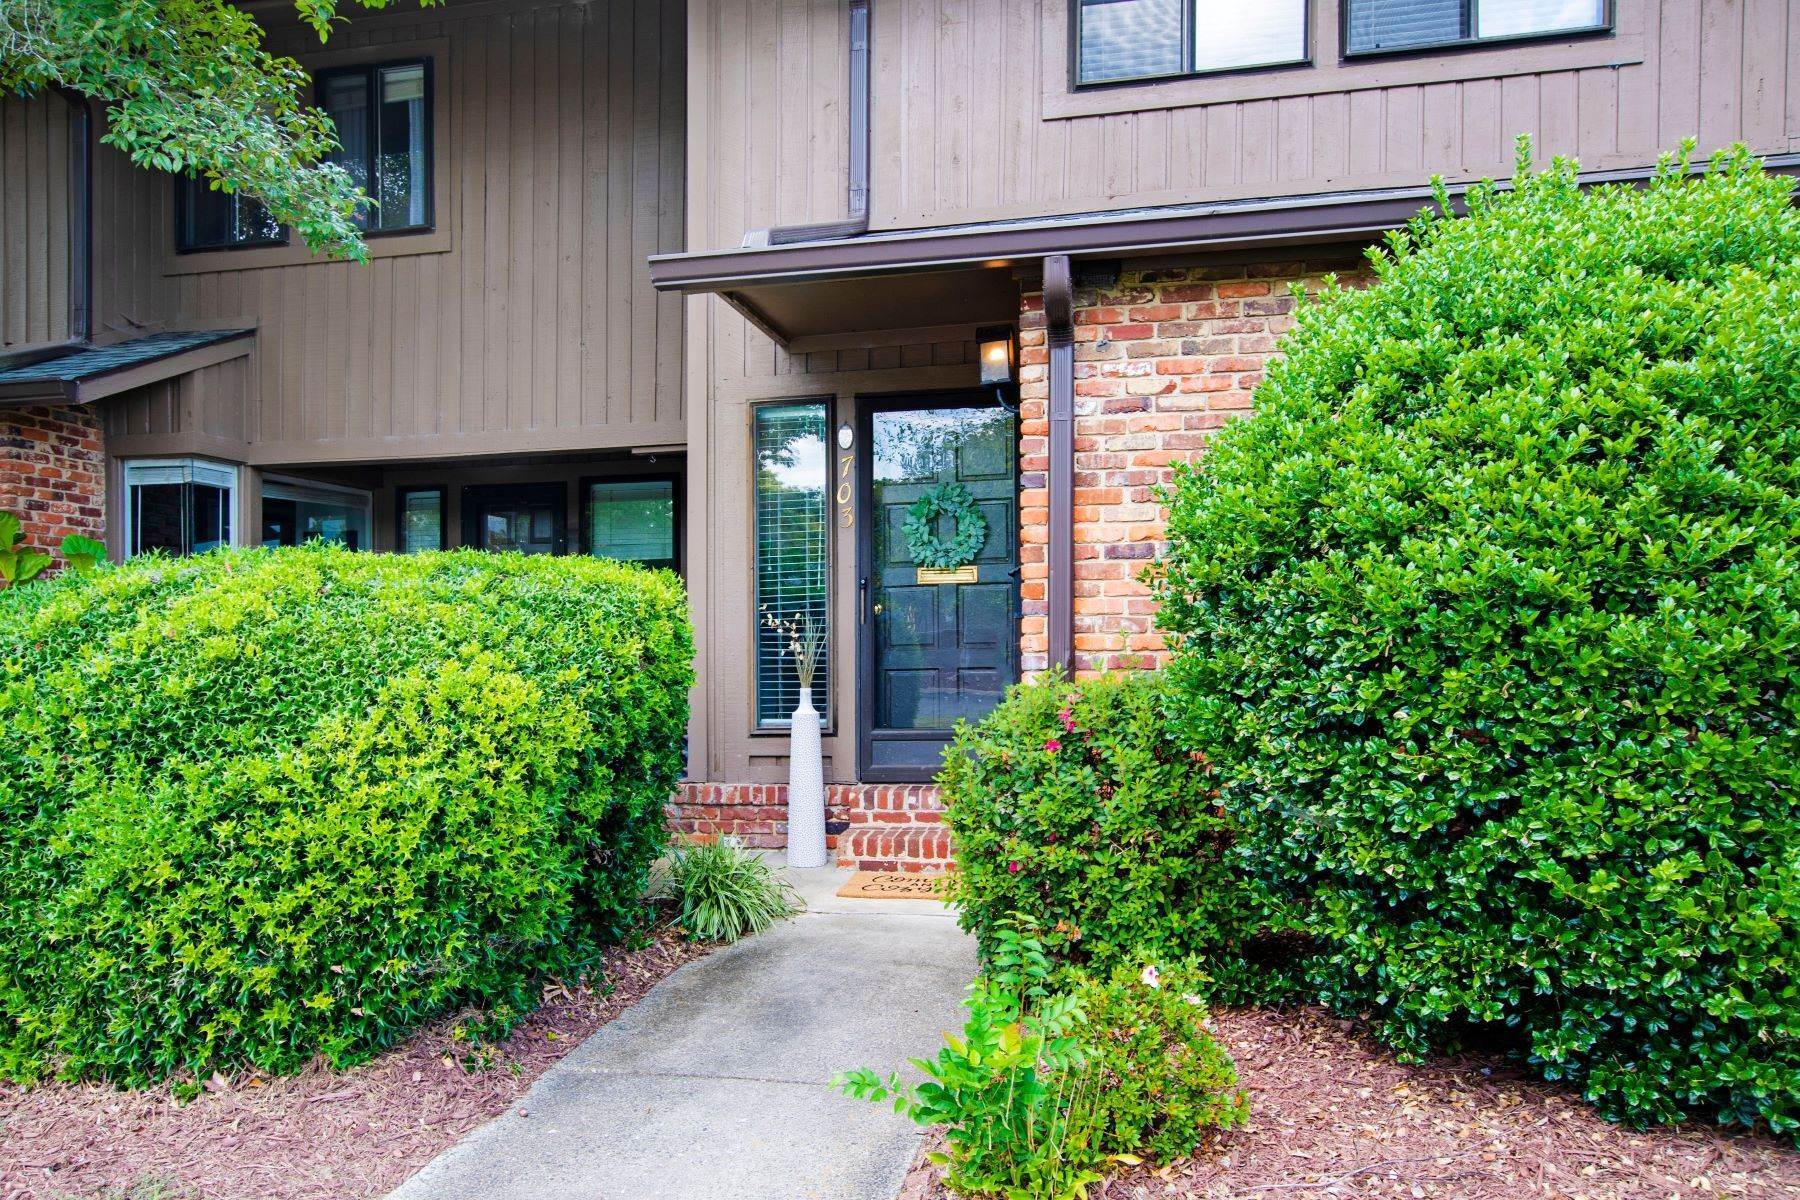 Condominiums for Sale at 703 Oak Tree Drive, Chapel Hill, NC 27517 703 Oak Tree Drive Chapel Hill, North Carolina 27517 United States